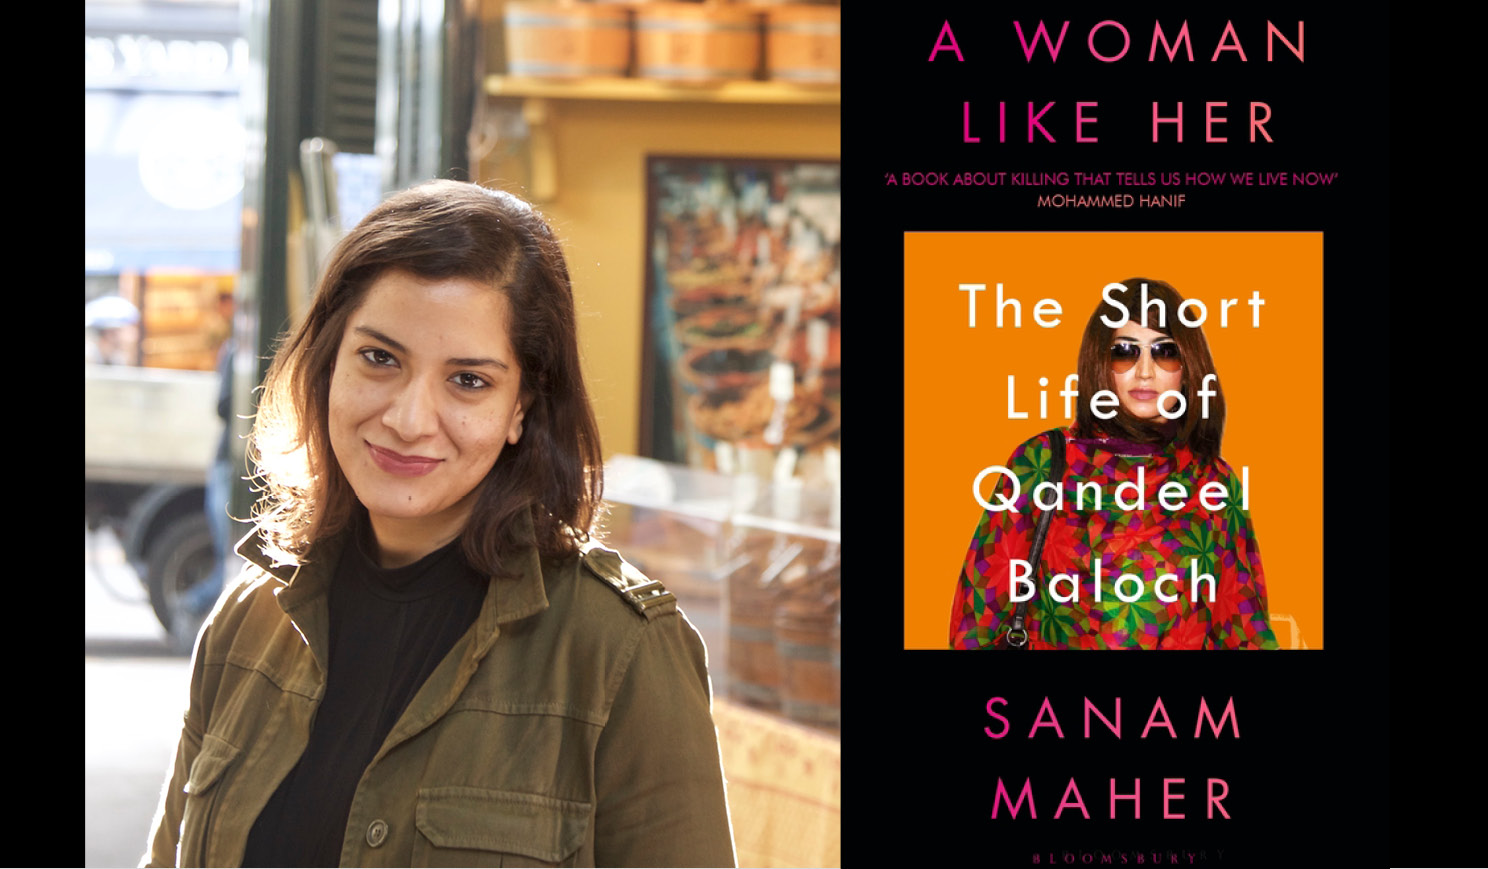 Sanam Maher's headshot alongside the cover of her book A Woman like her